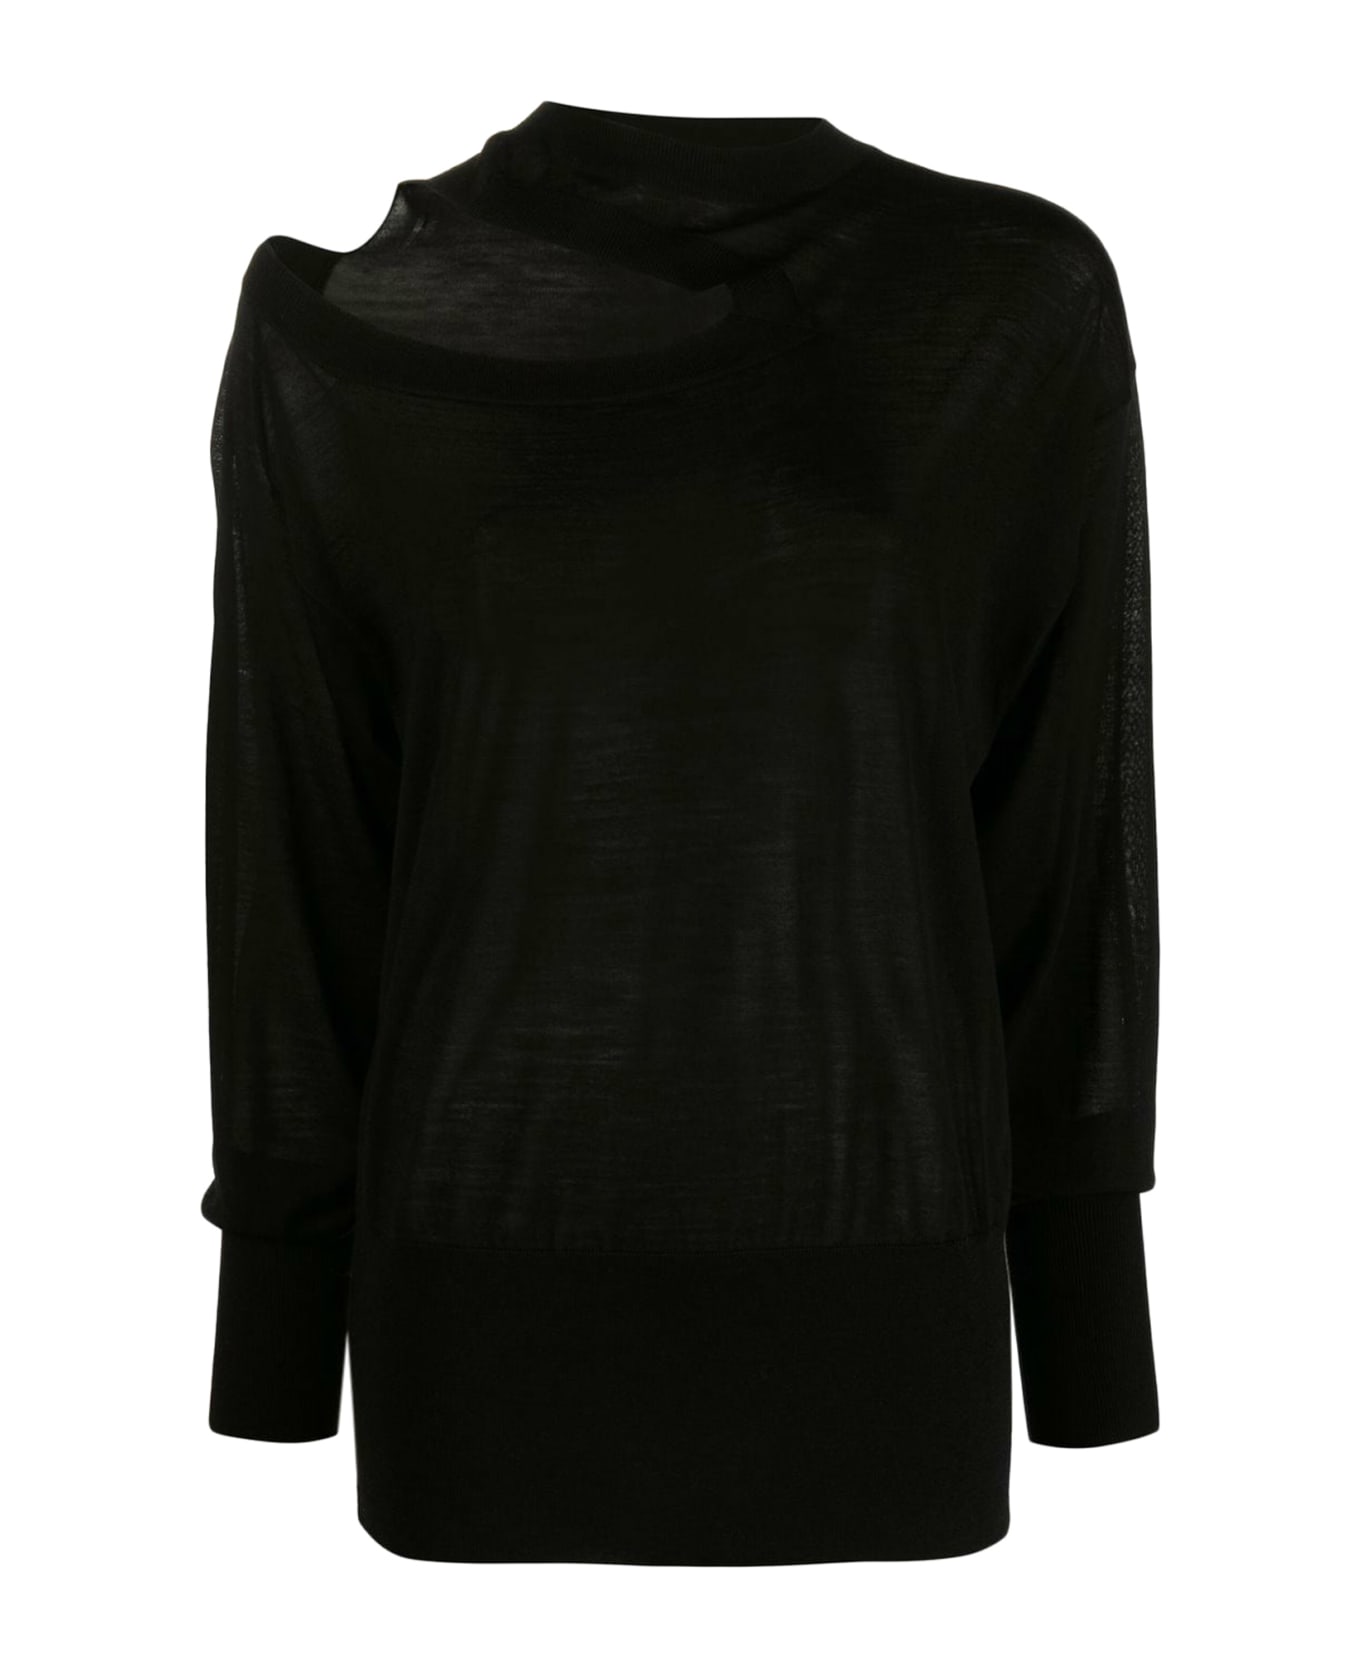 Stella McCartney Cut Out-detail Crewneck Knitted Top - Black トップス